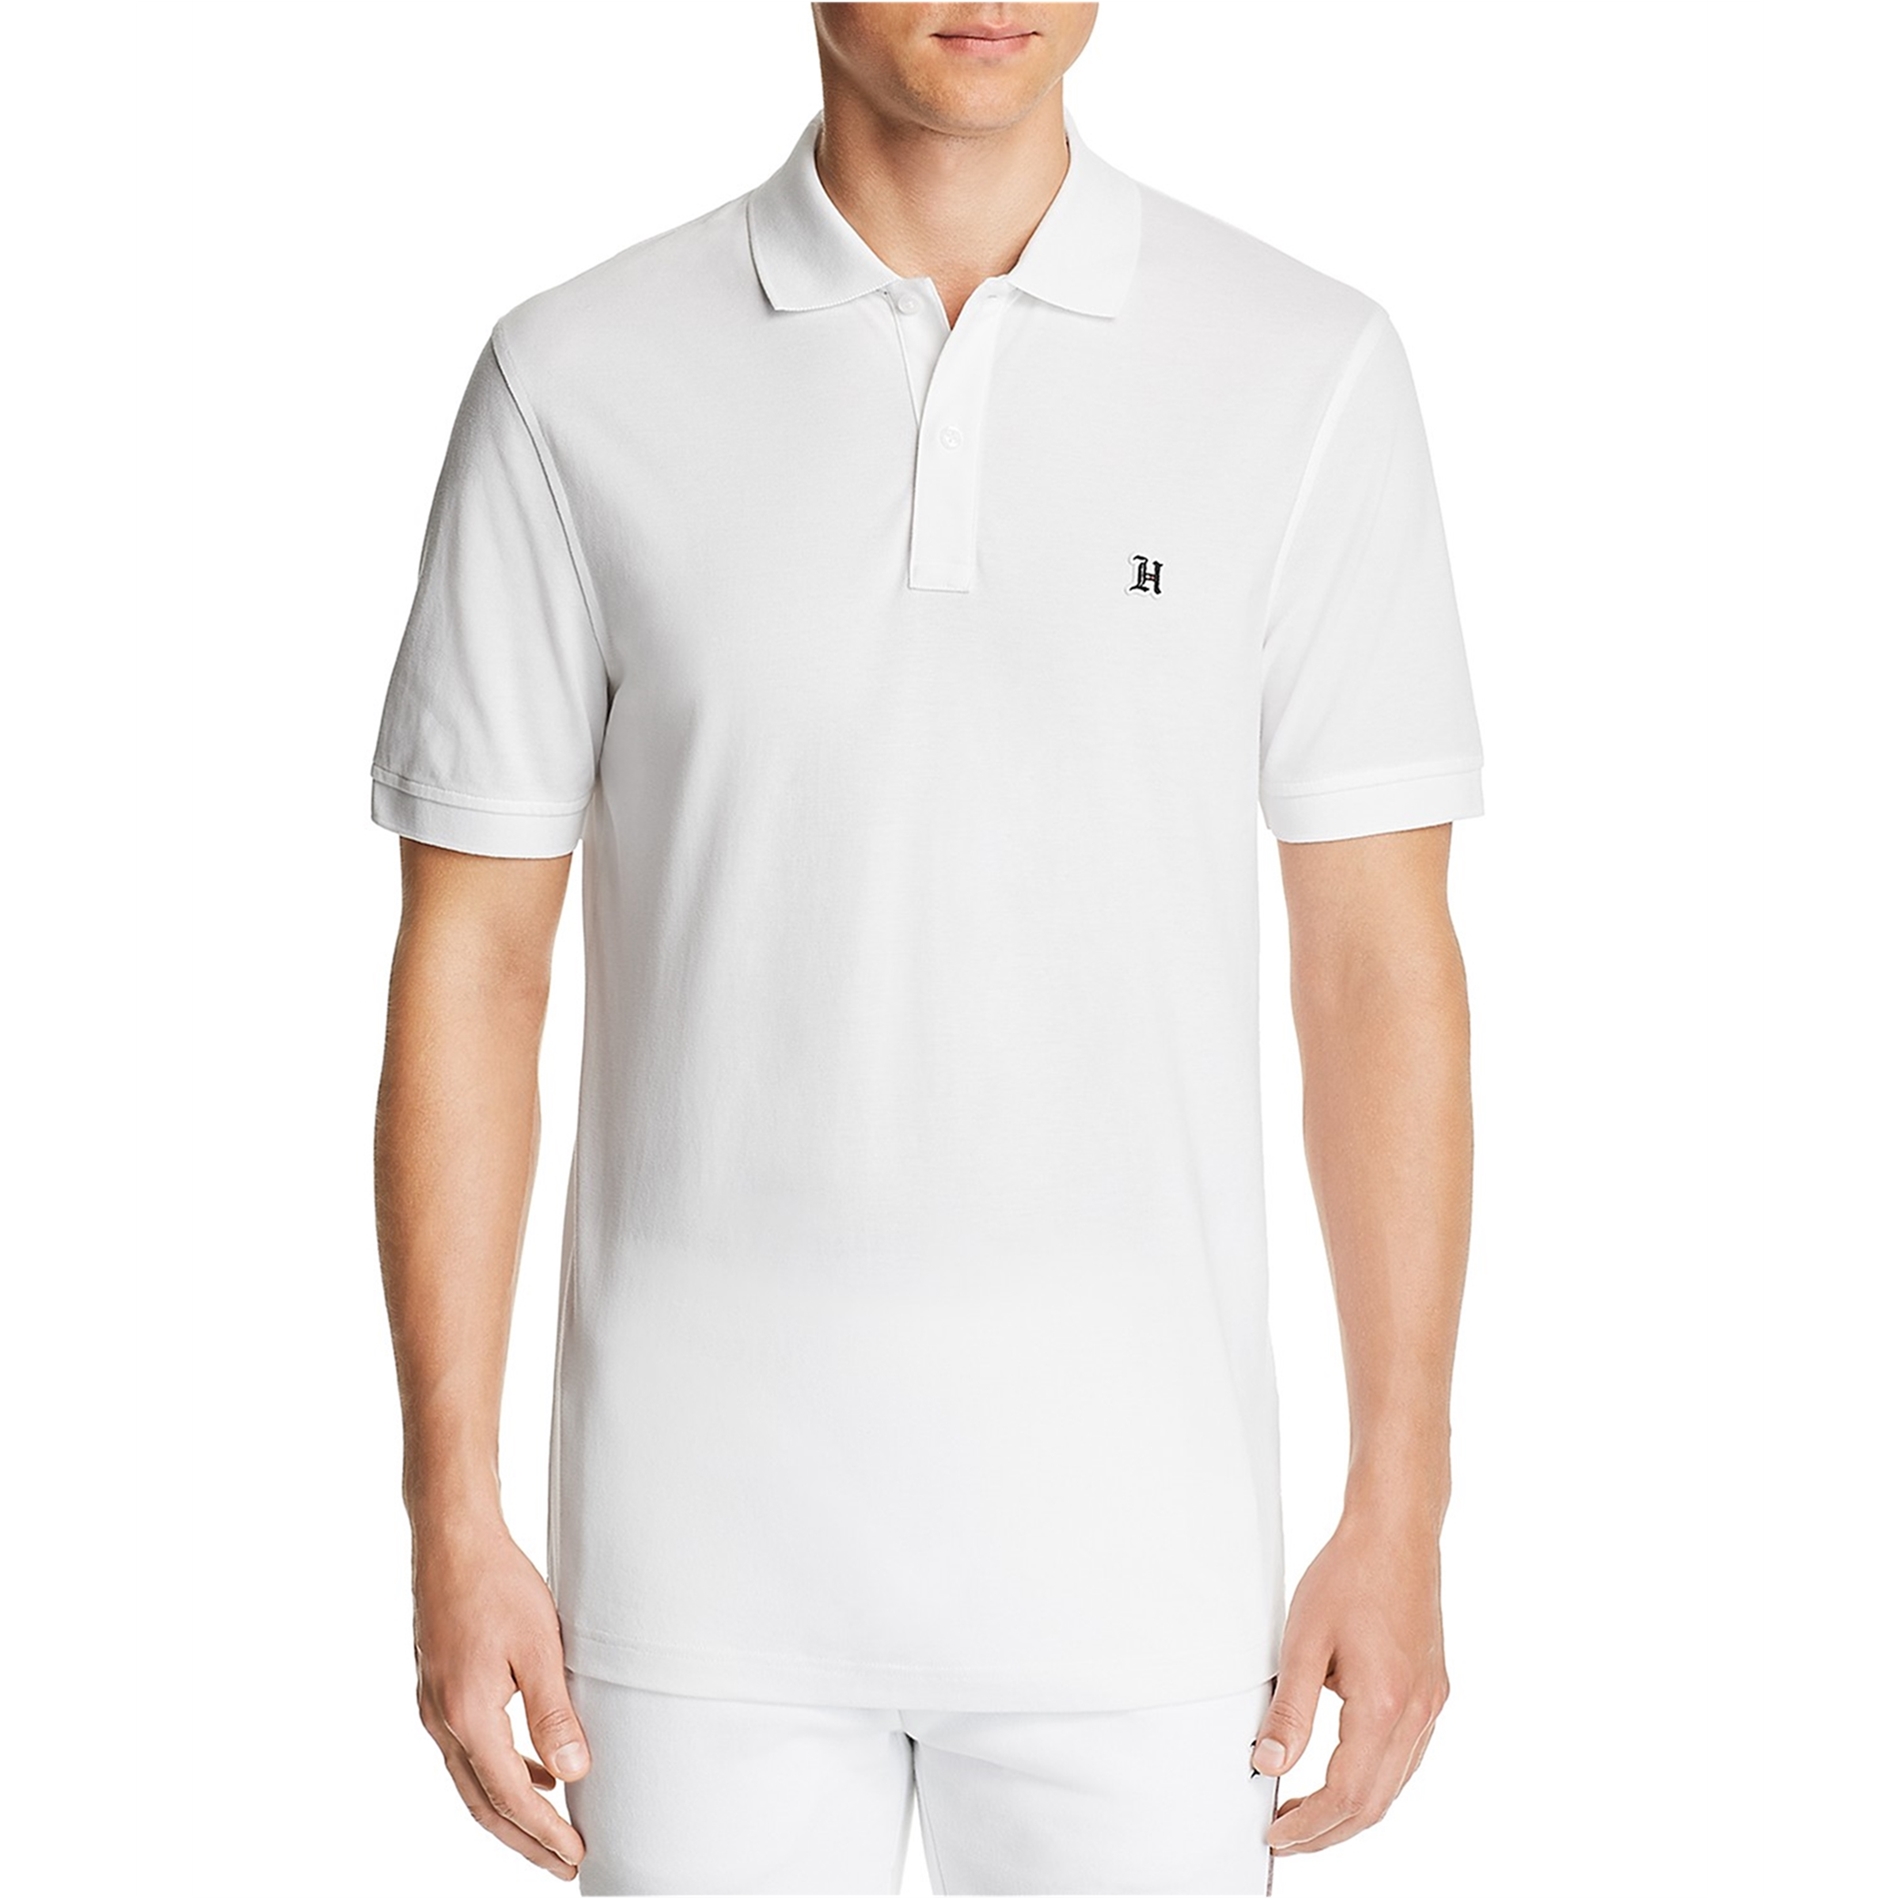 tonight stream amateur Tommy Hilfiger Mens Lewis Hamilton Rugby Polo Shirt